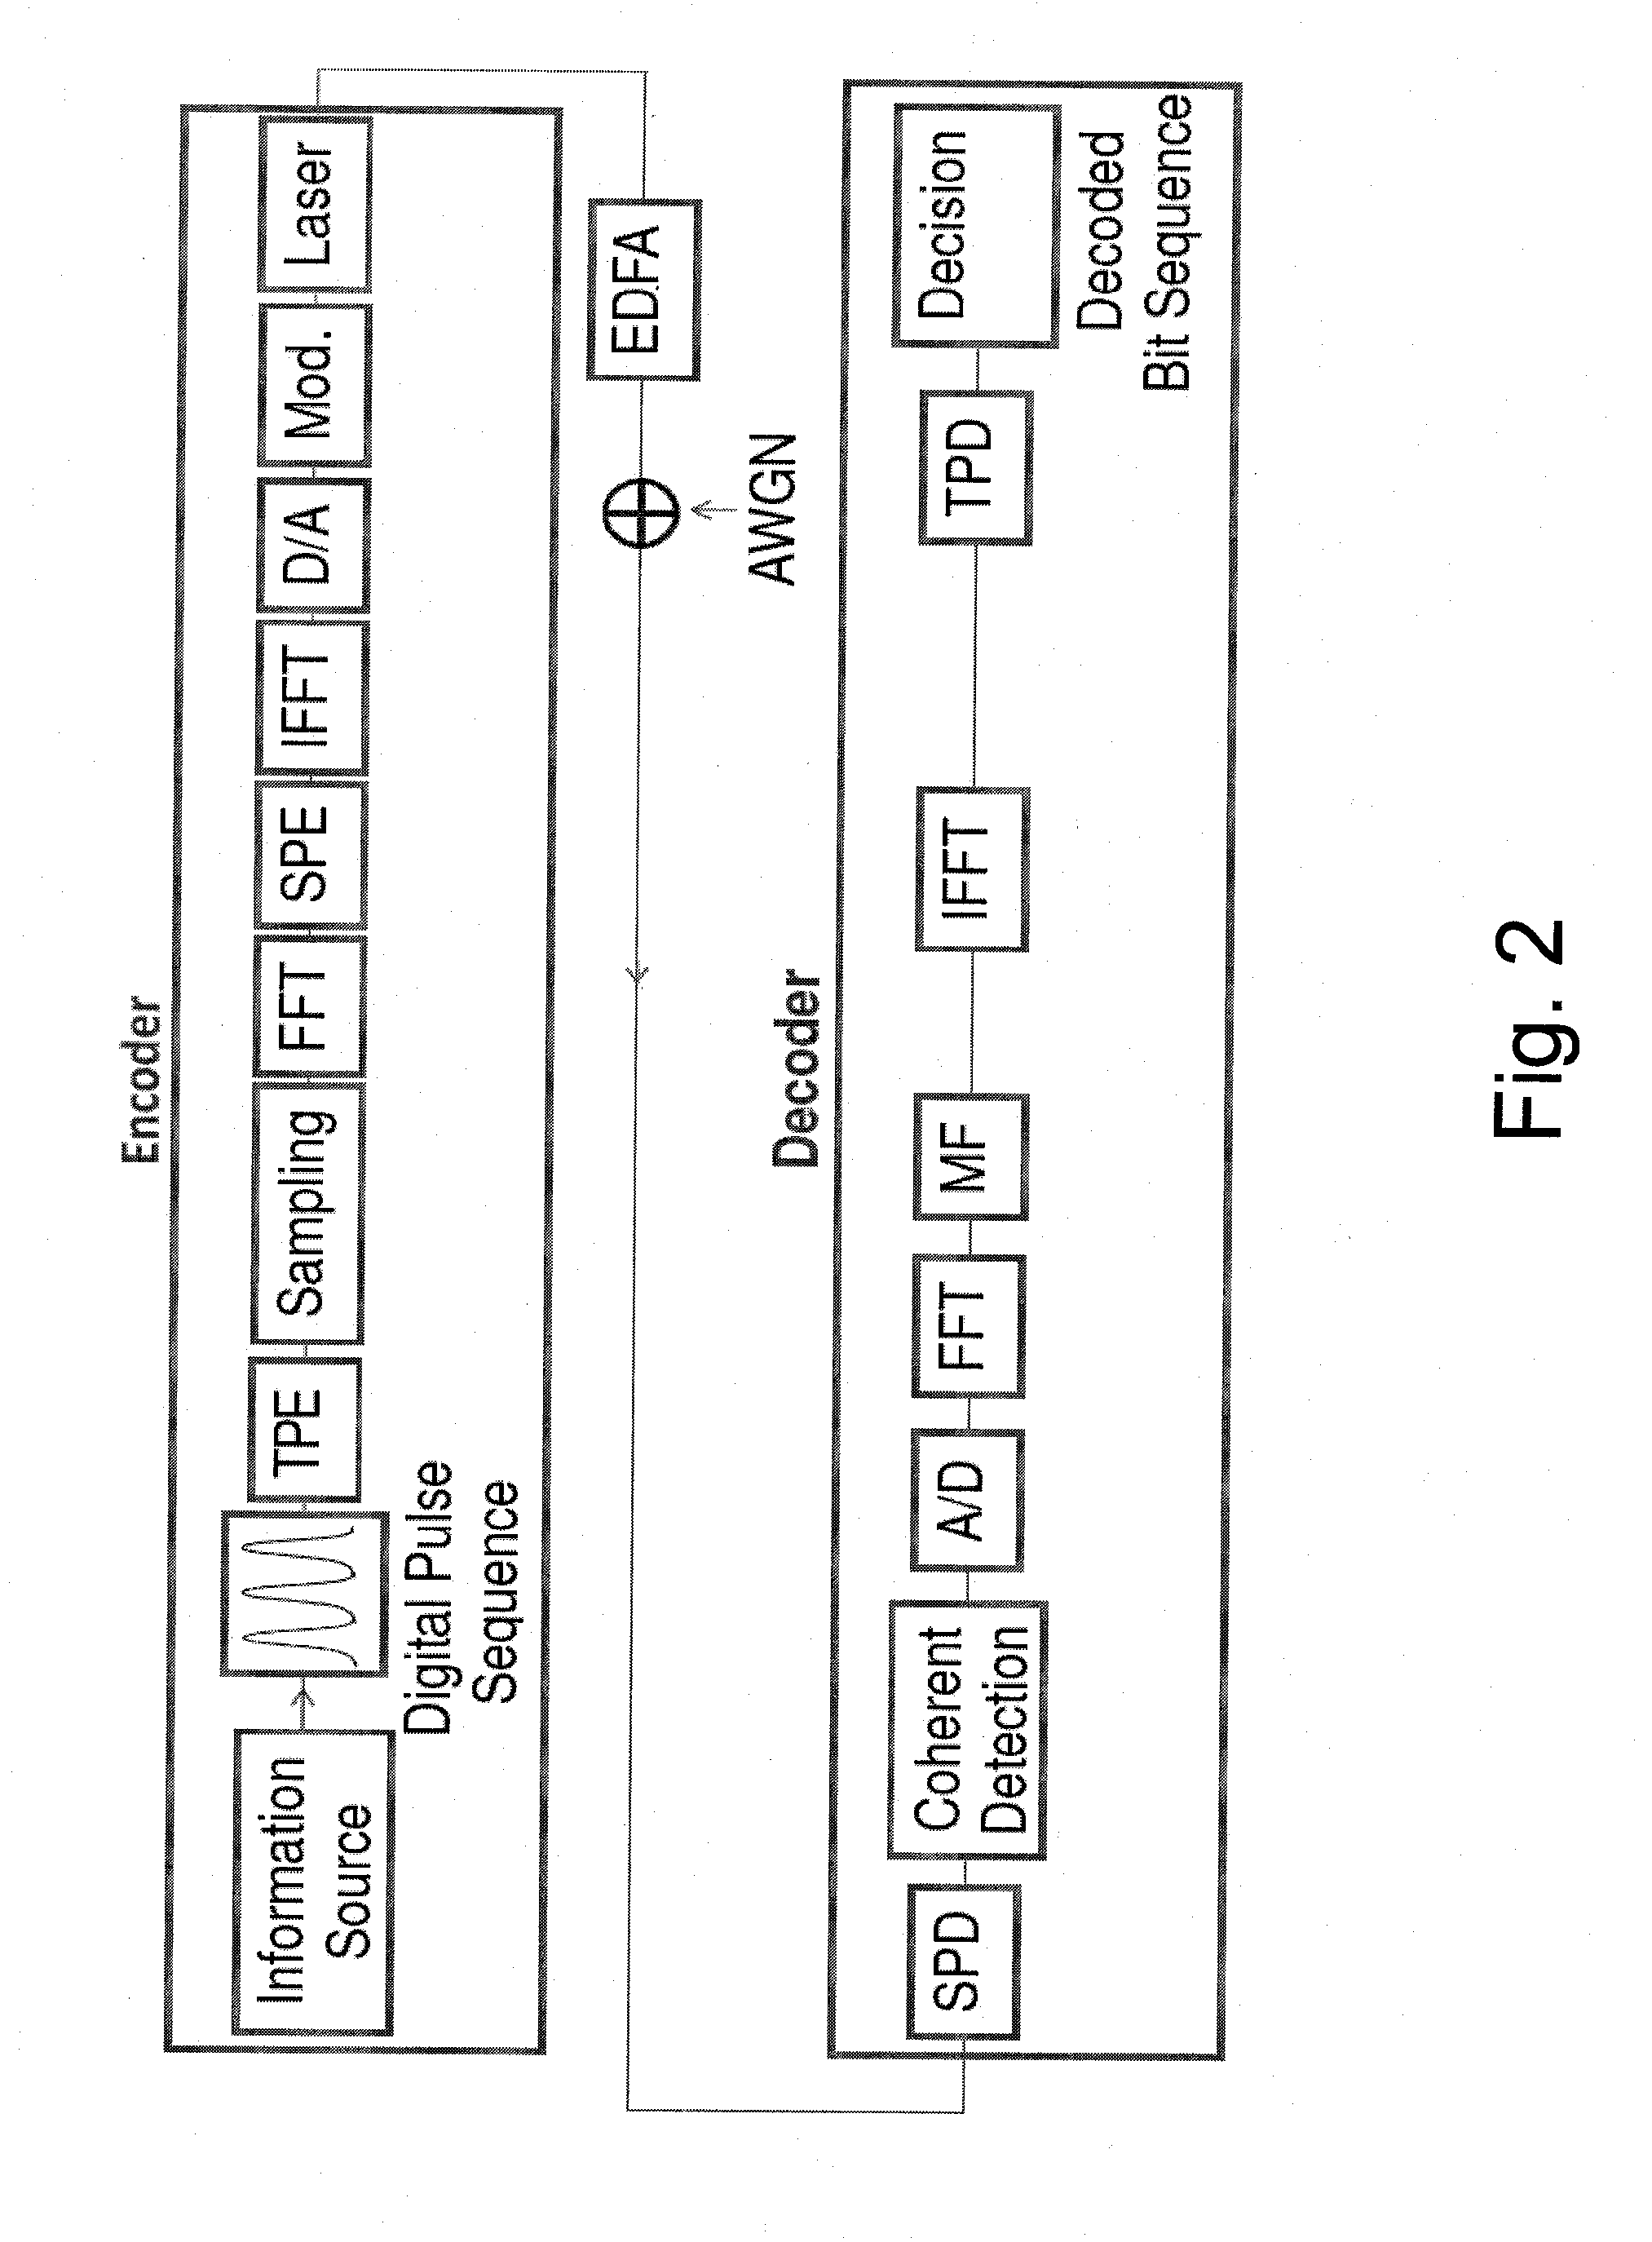 Spectral and temporal stealthy fiber optic communication using sampling and phase encoding detection system